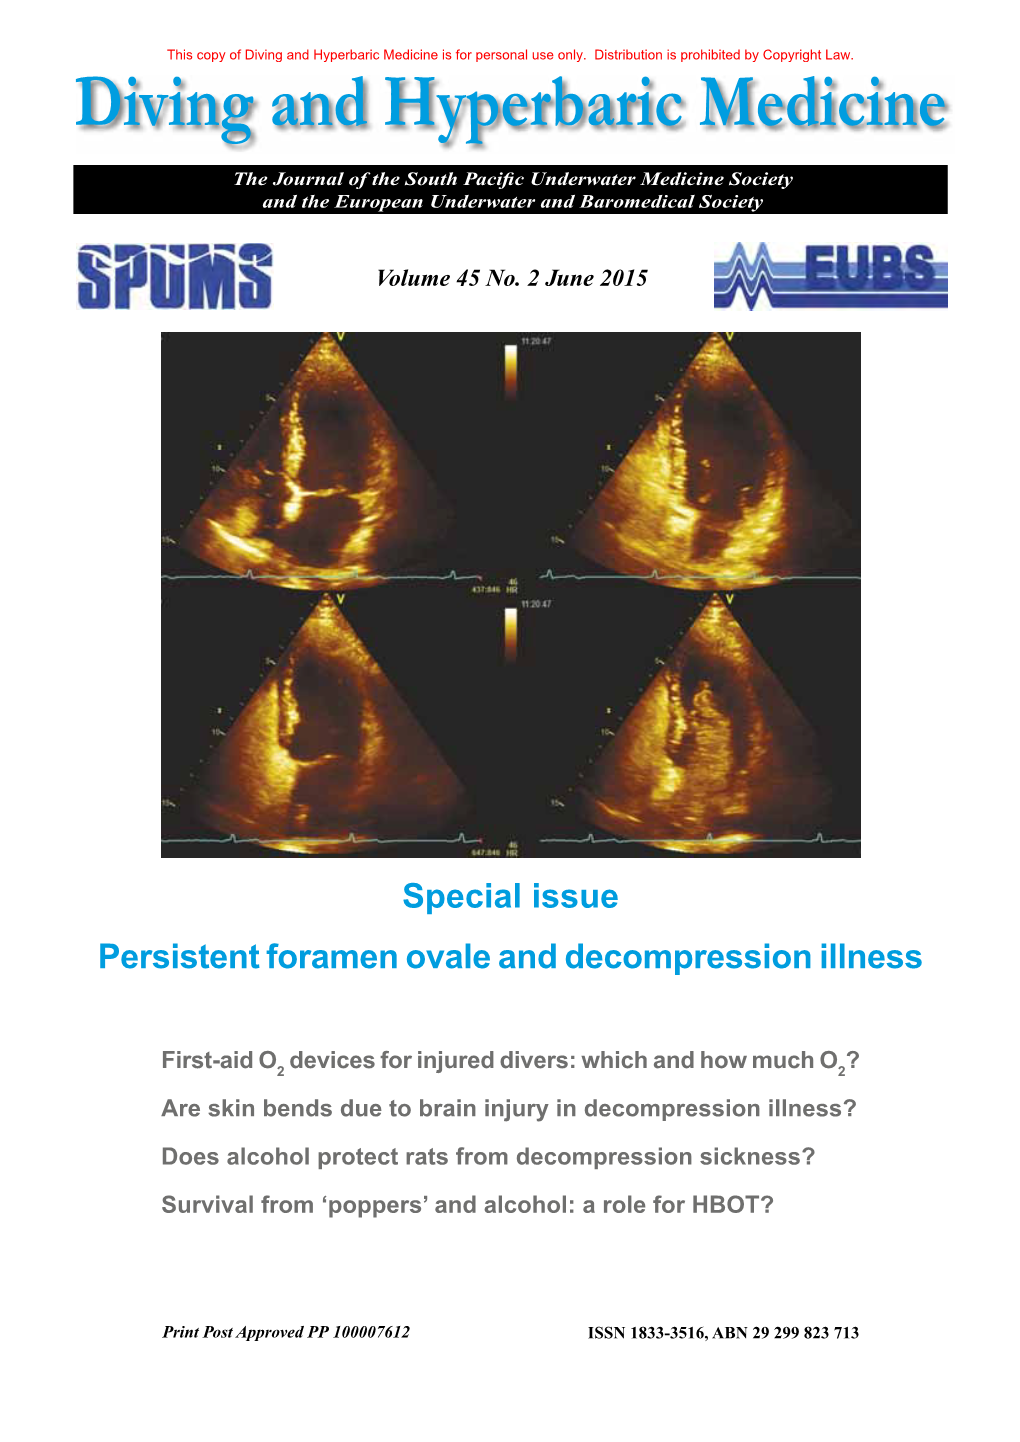 Special Issue Persistent Foramen Ovale and Decompression Illness